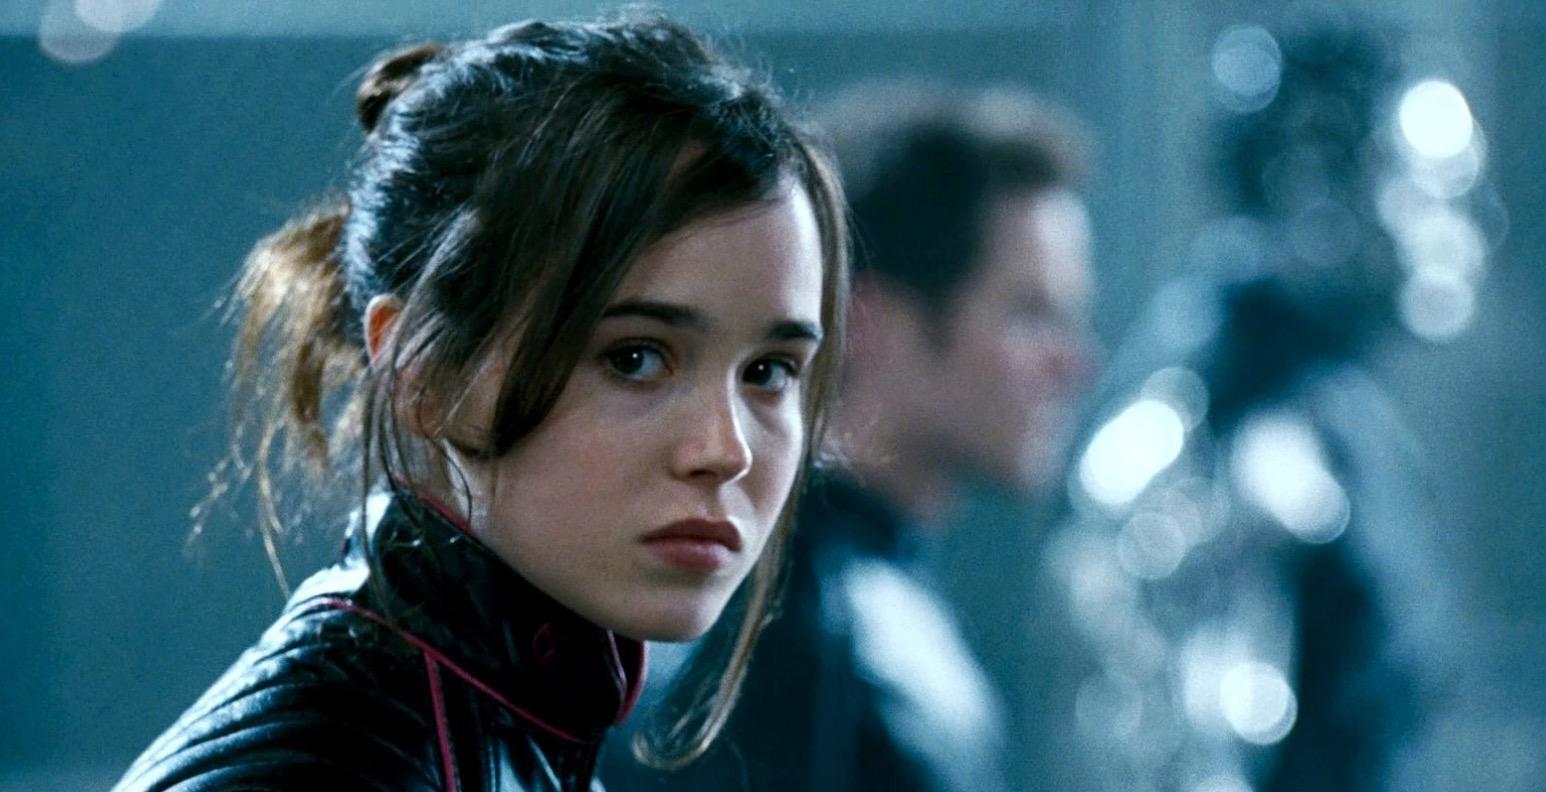 Ellen Page was 18 when she filmed X-Men: The Last Stand with Ratner